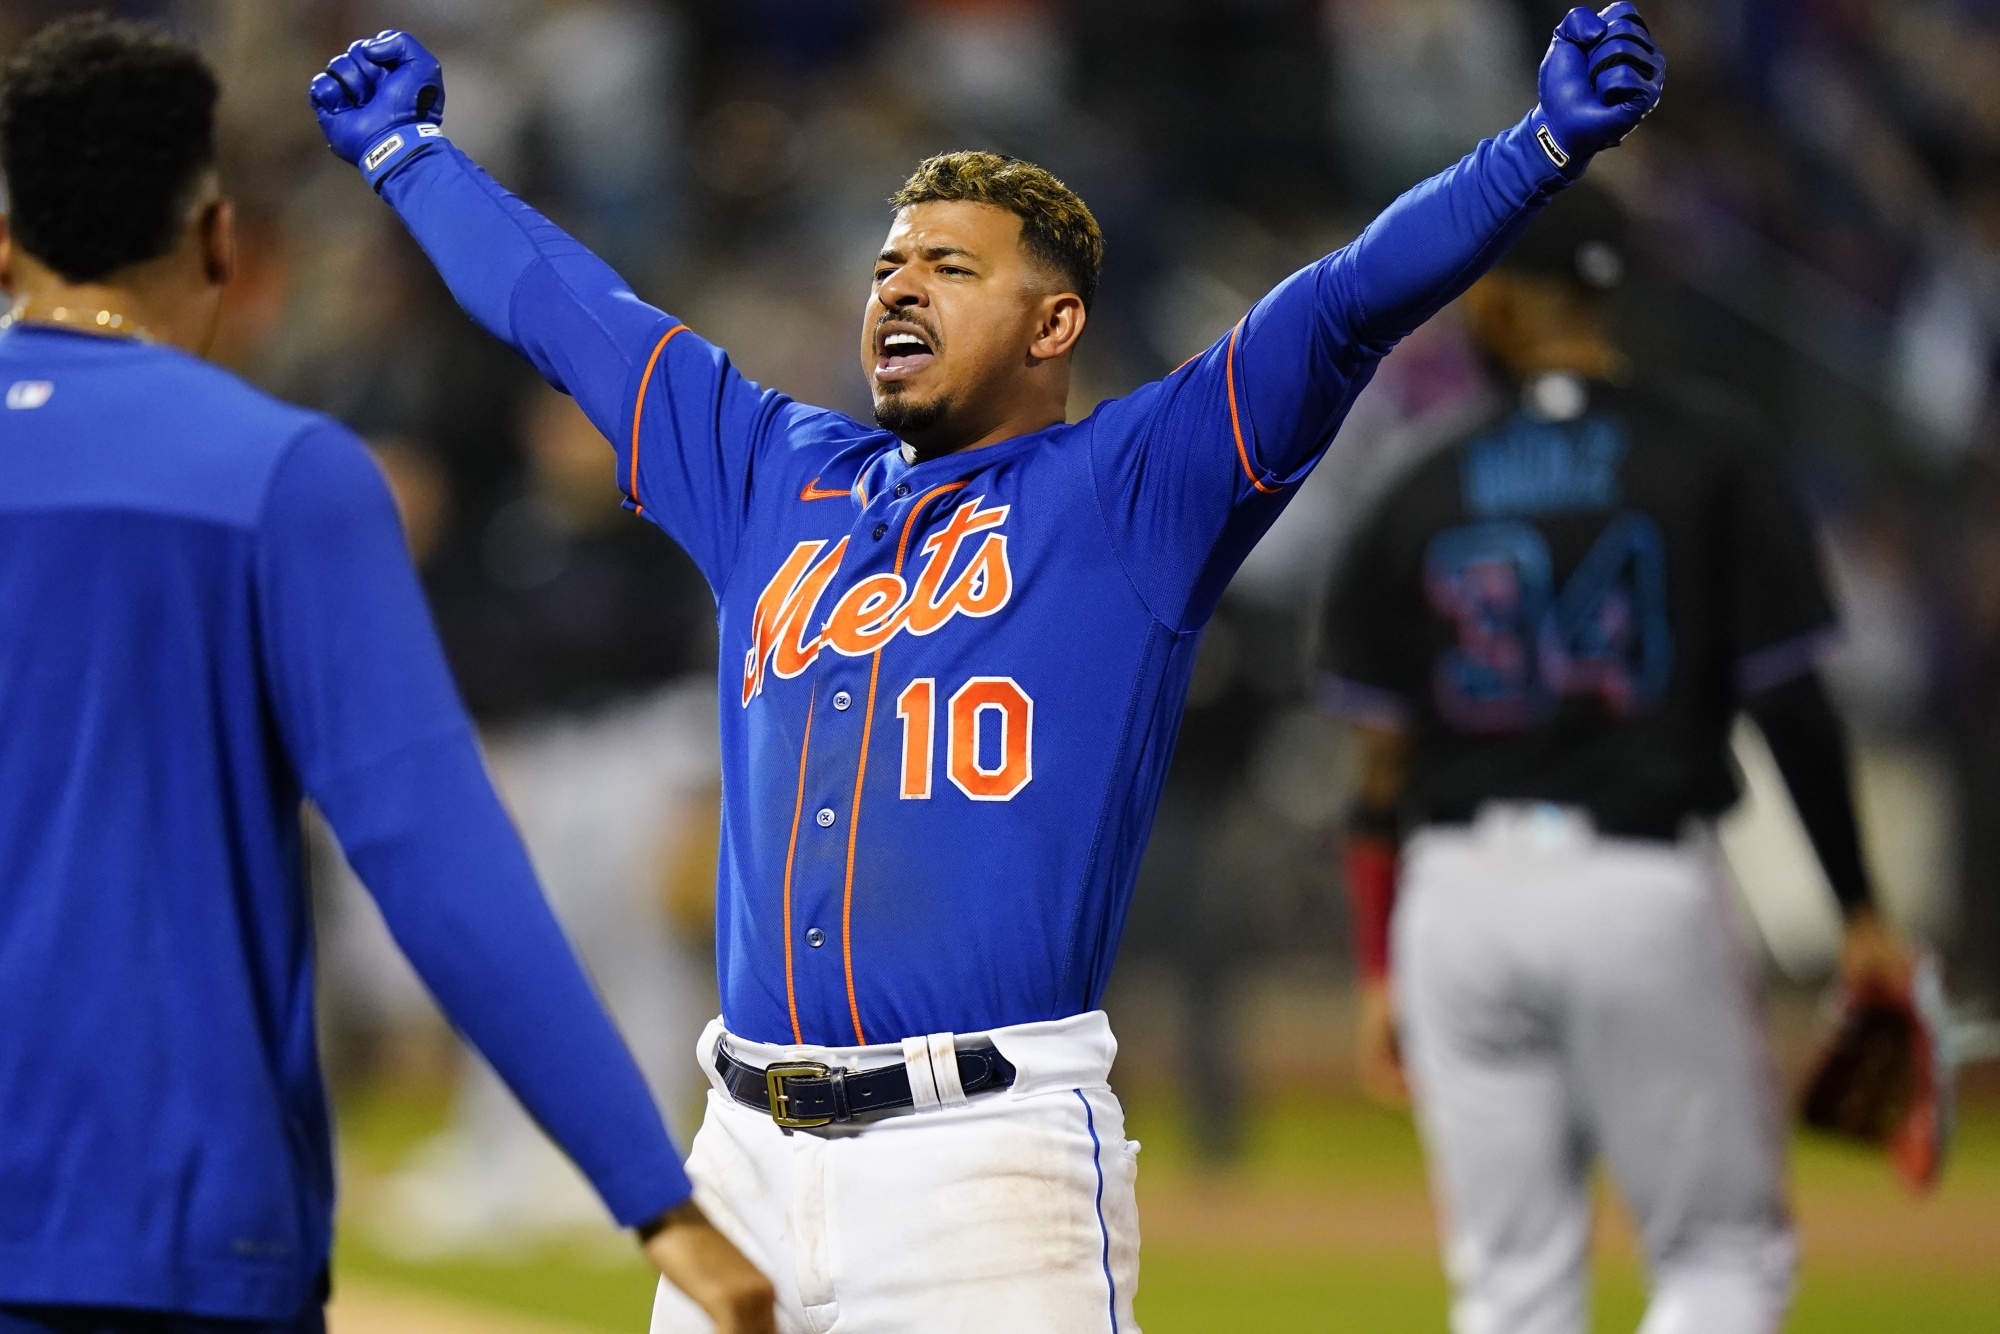 The New York Mets are reviving their black uniforms for the second